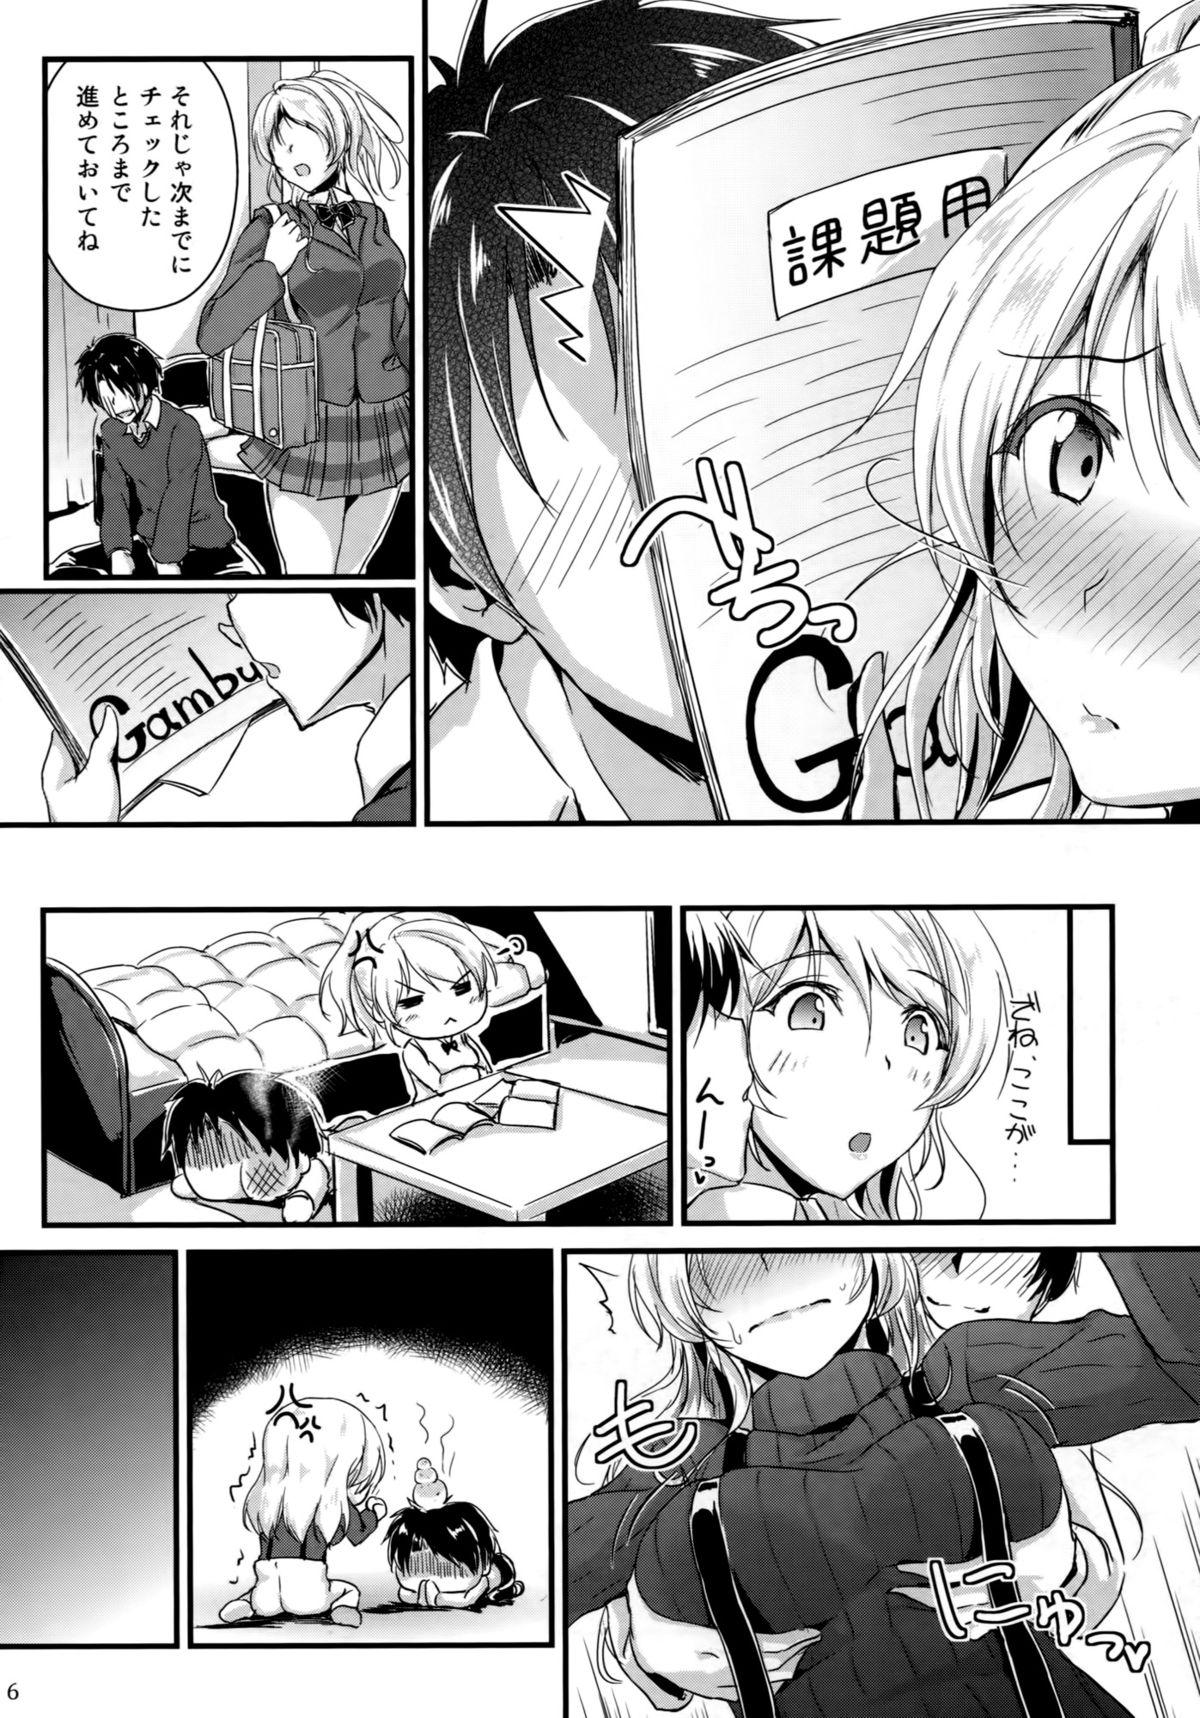 Full Movie Let's Study xxx 5 - Love live French - Page 5